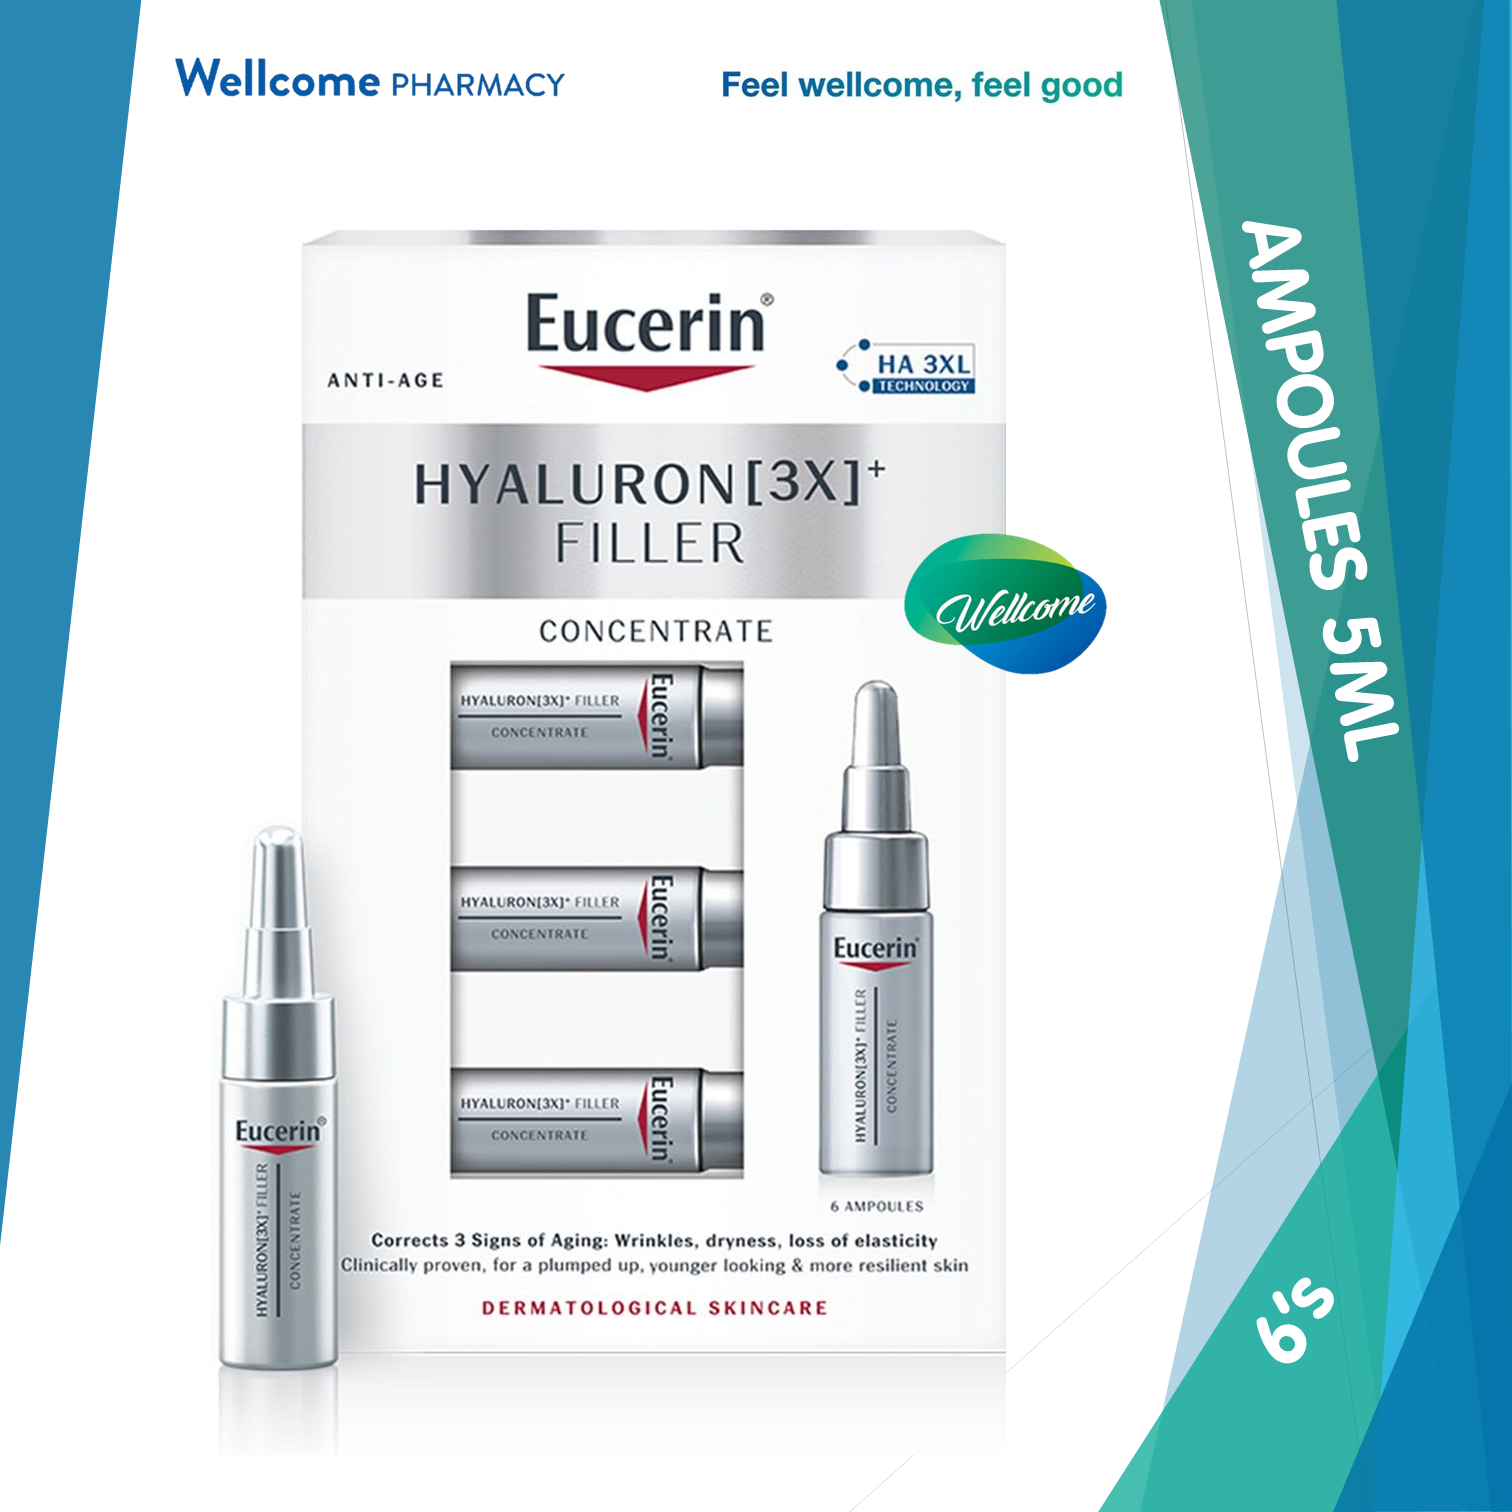 Eucerin Hyaluron Filler Concentrate - 6 x 5ml